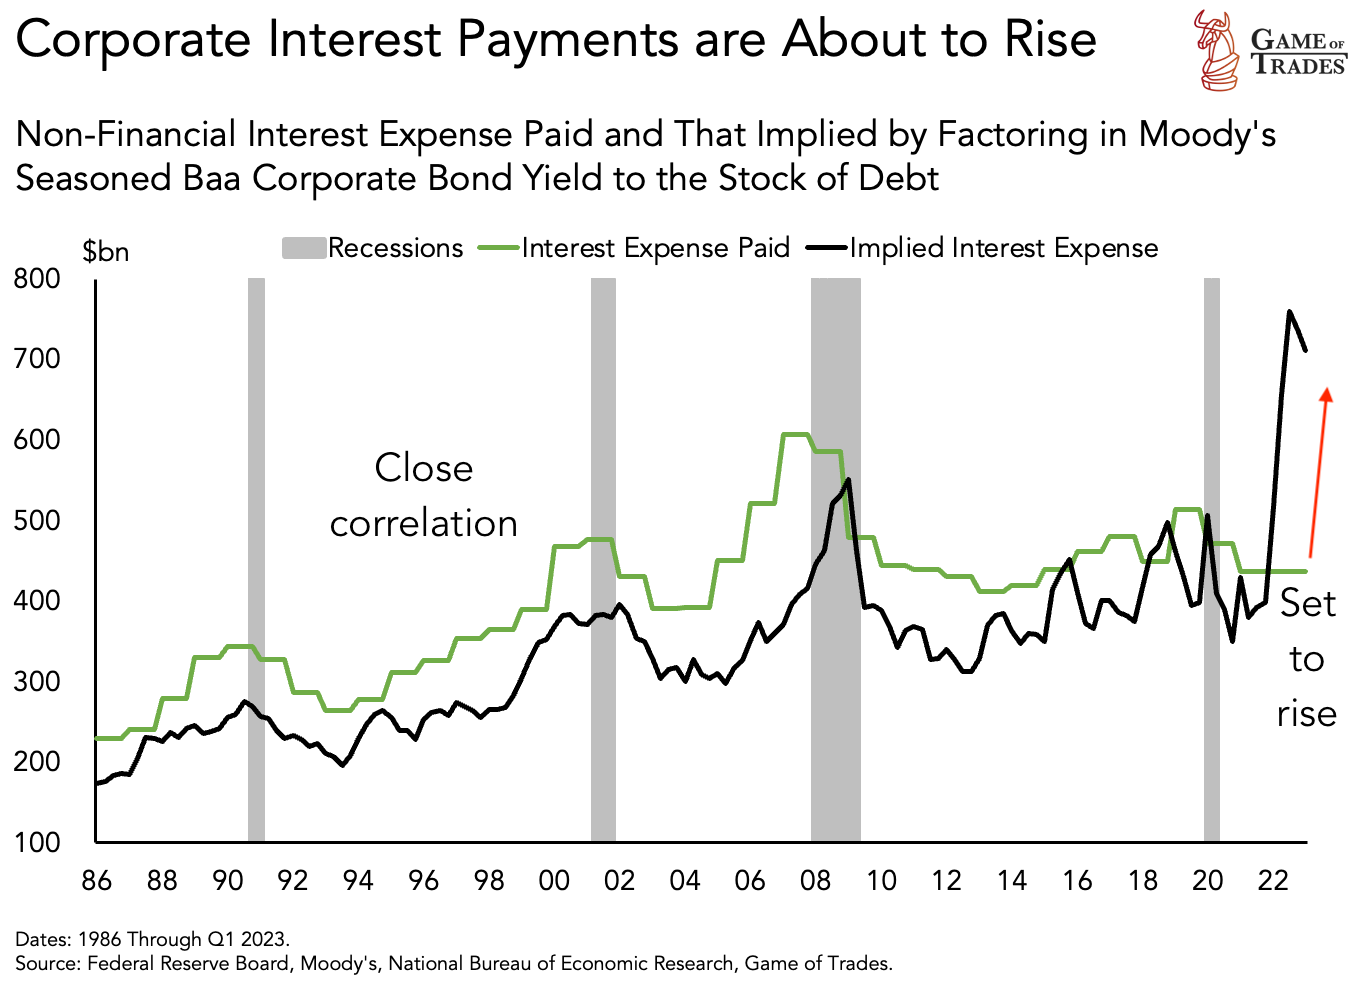 Corporate Interest Payments